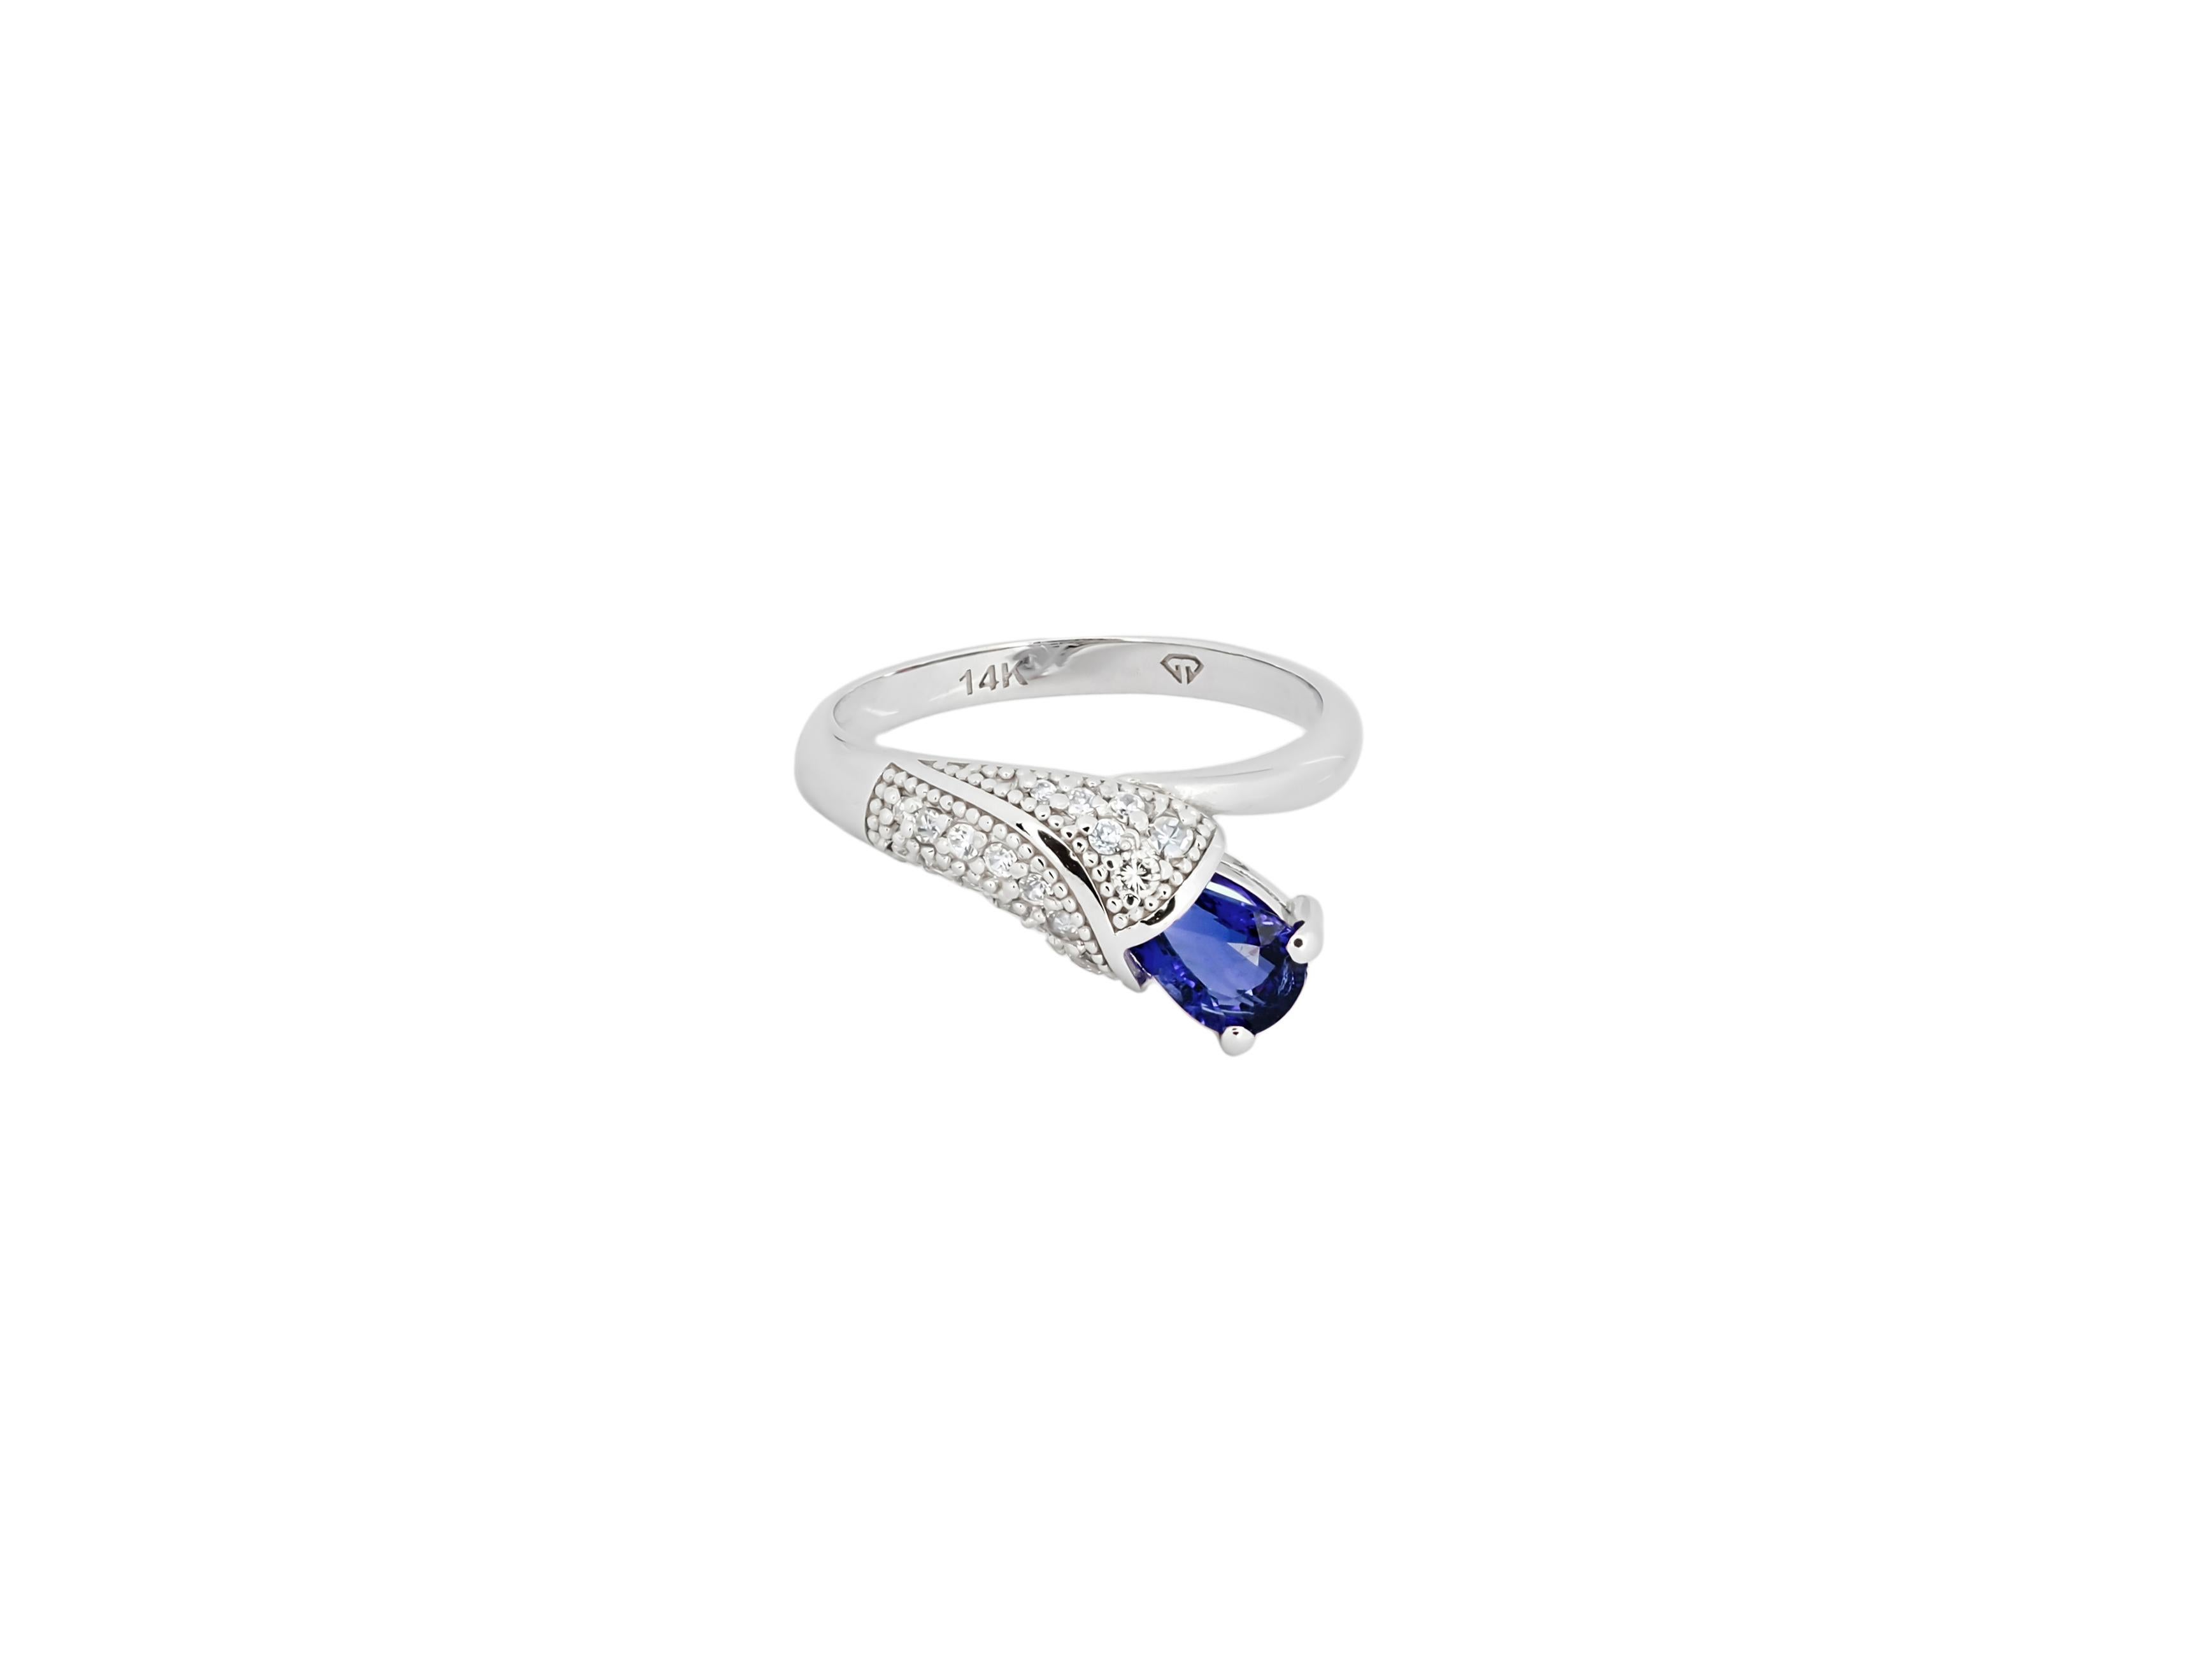 Pear sapphire 14k gold ring.Blue gemstone gold ring. September birthstone ring. Blue sapphire ring.
Lily flower gold ring with sapphire.

14 ct gold
Weight: 2.5 gr depends from size
Set with sapphire, color blue
Pear cut, apx 1 ct
Clarity: